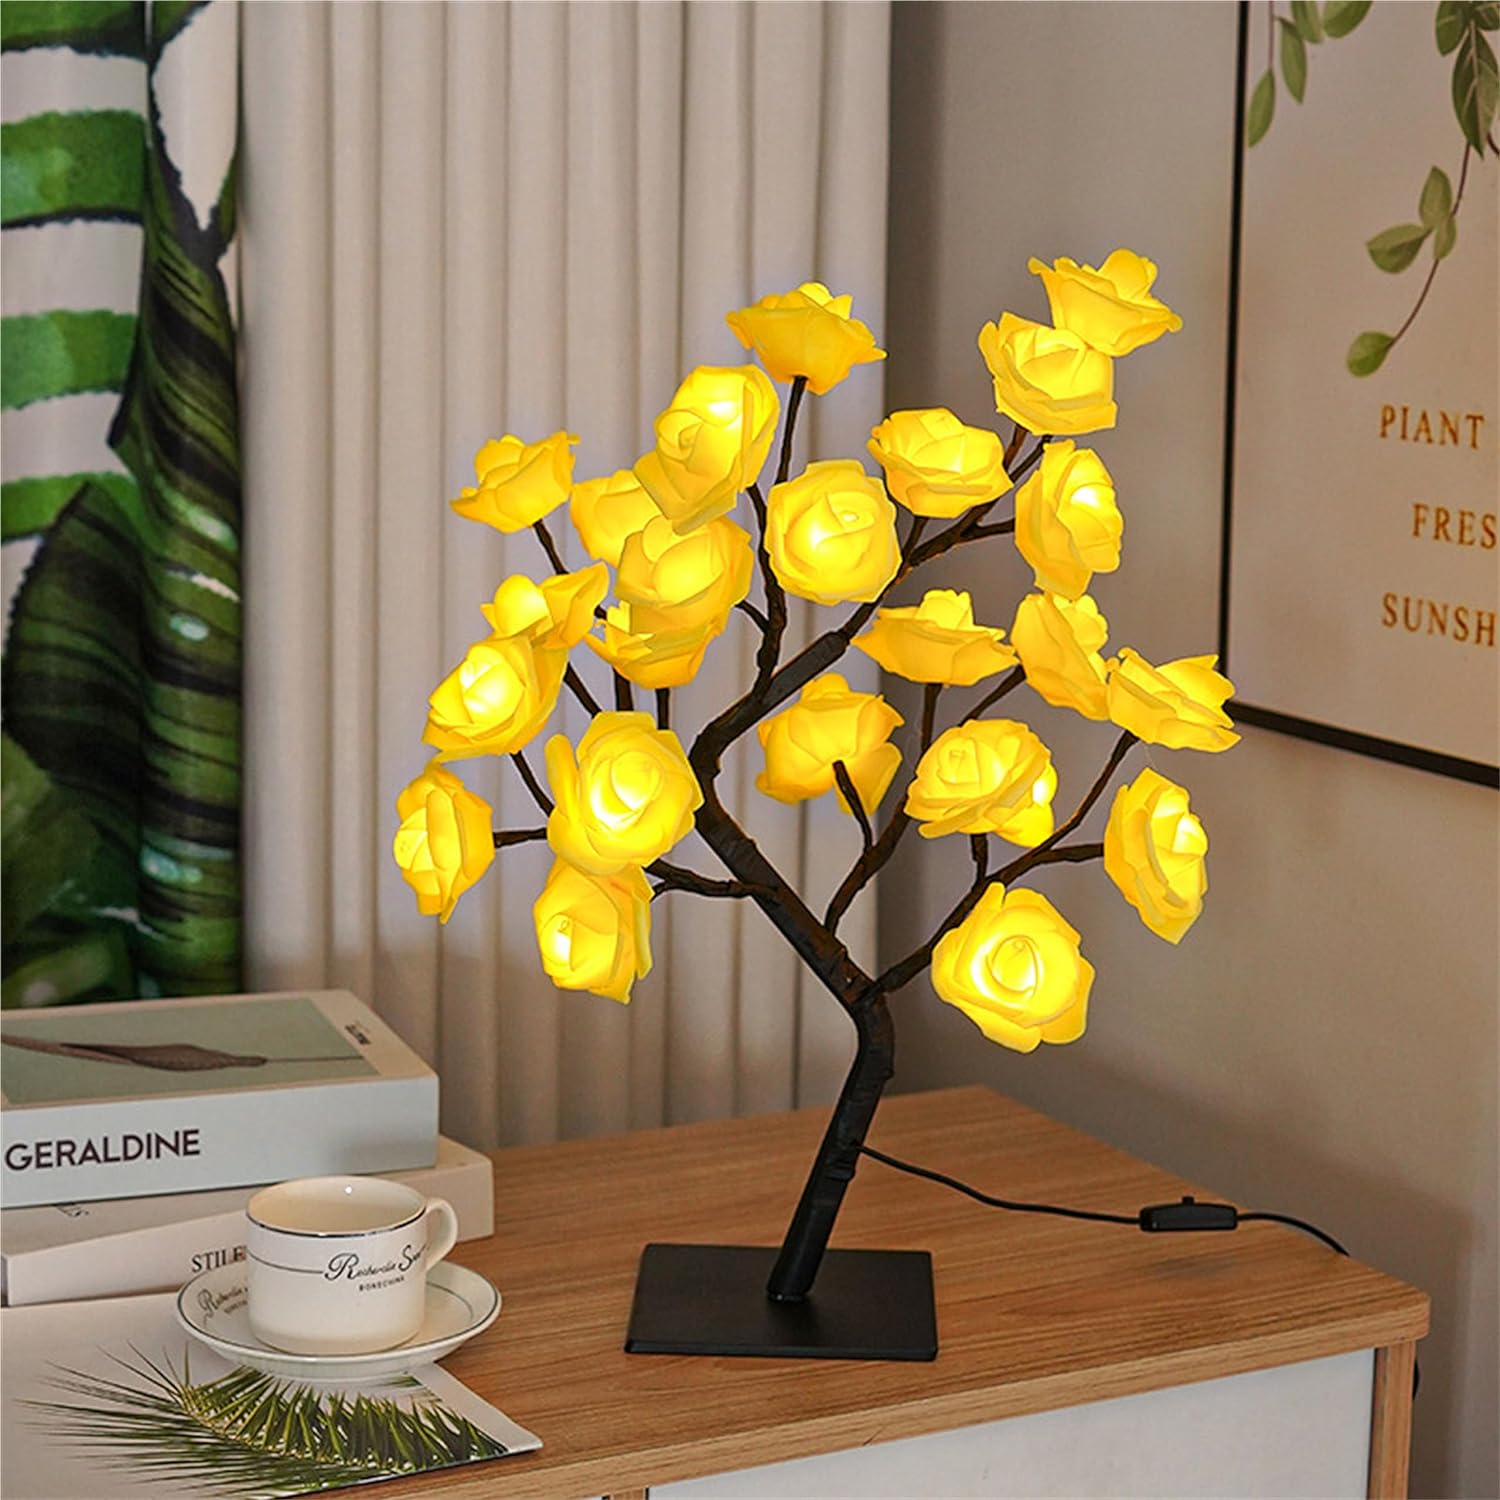 XVICO LED Desk Lamps LED Rose Tree Lamp Artificial Bonsai Tree Night Light Centerpiece Fairy Light for Home Bedroom Valentines Day Easter Wedding Party Decor LED Desk Light (Yellow) 1